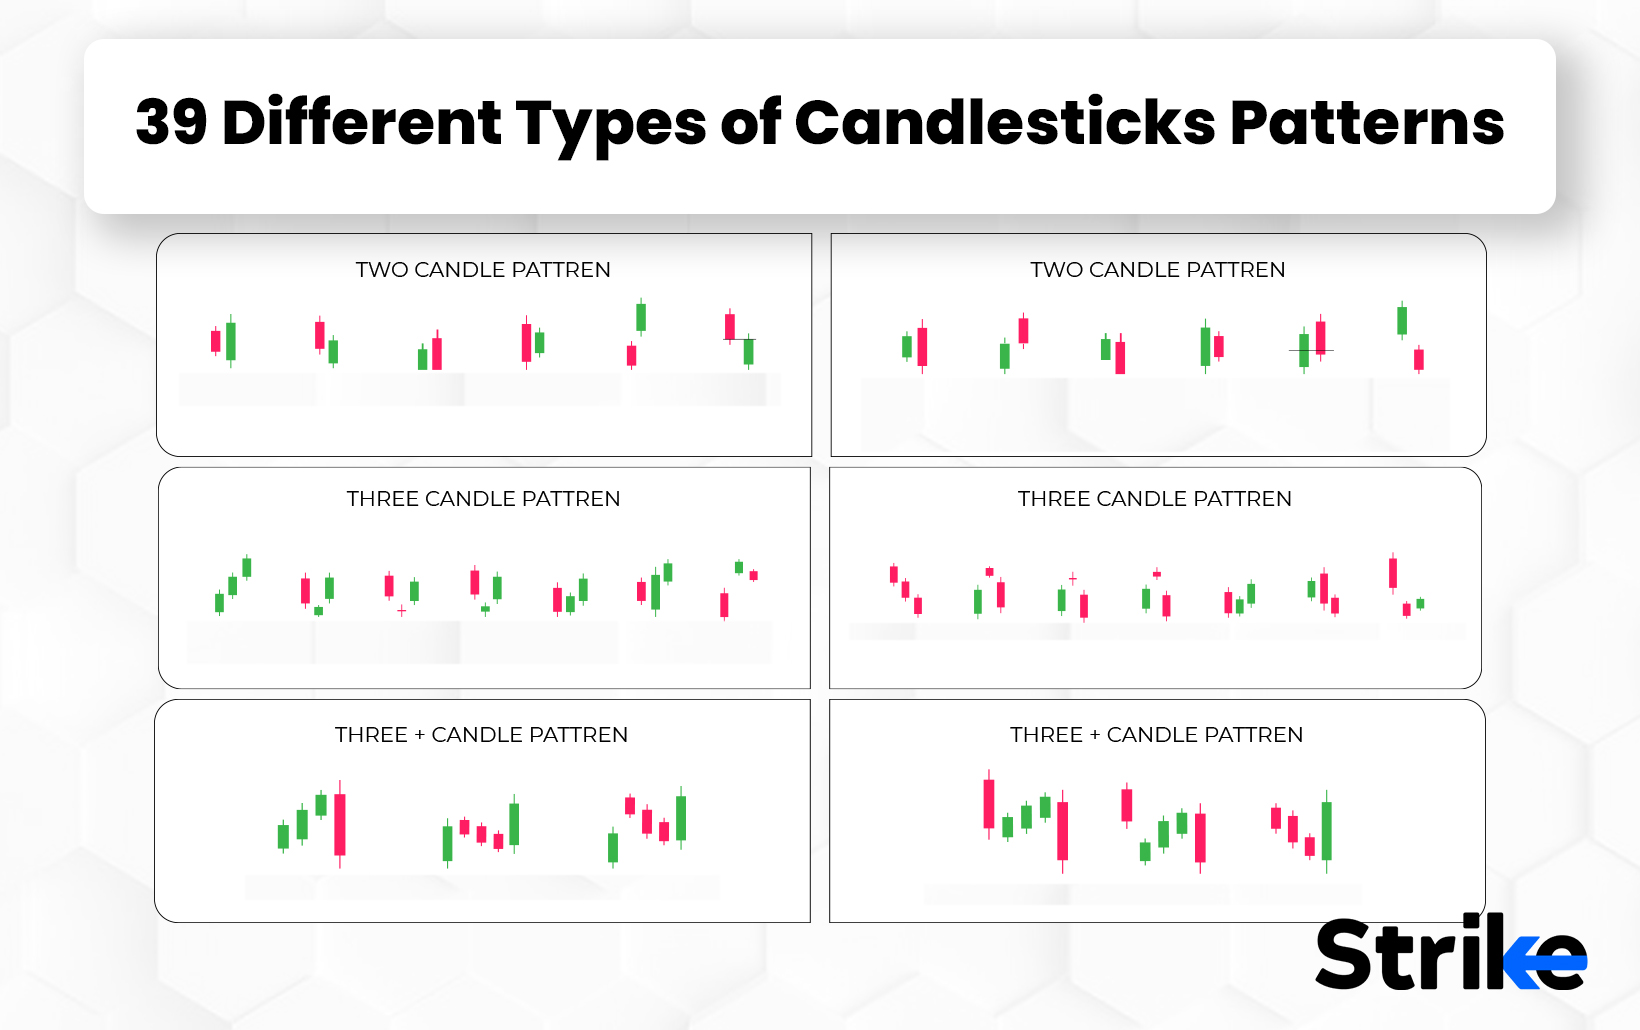 Short Line Candle: Meaning in Technical Analysis